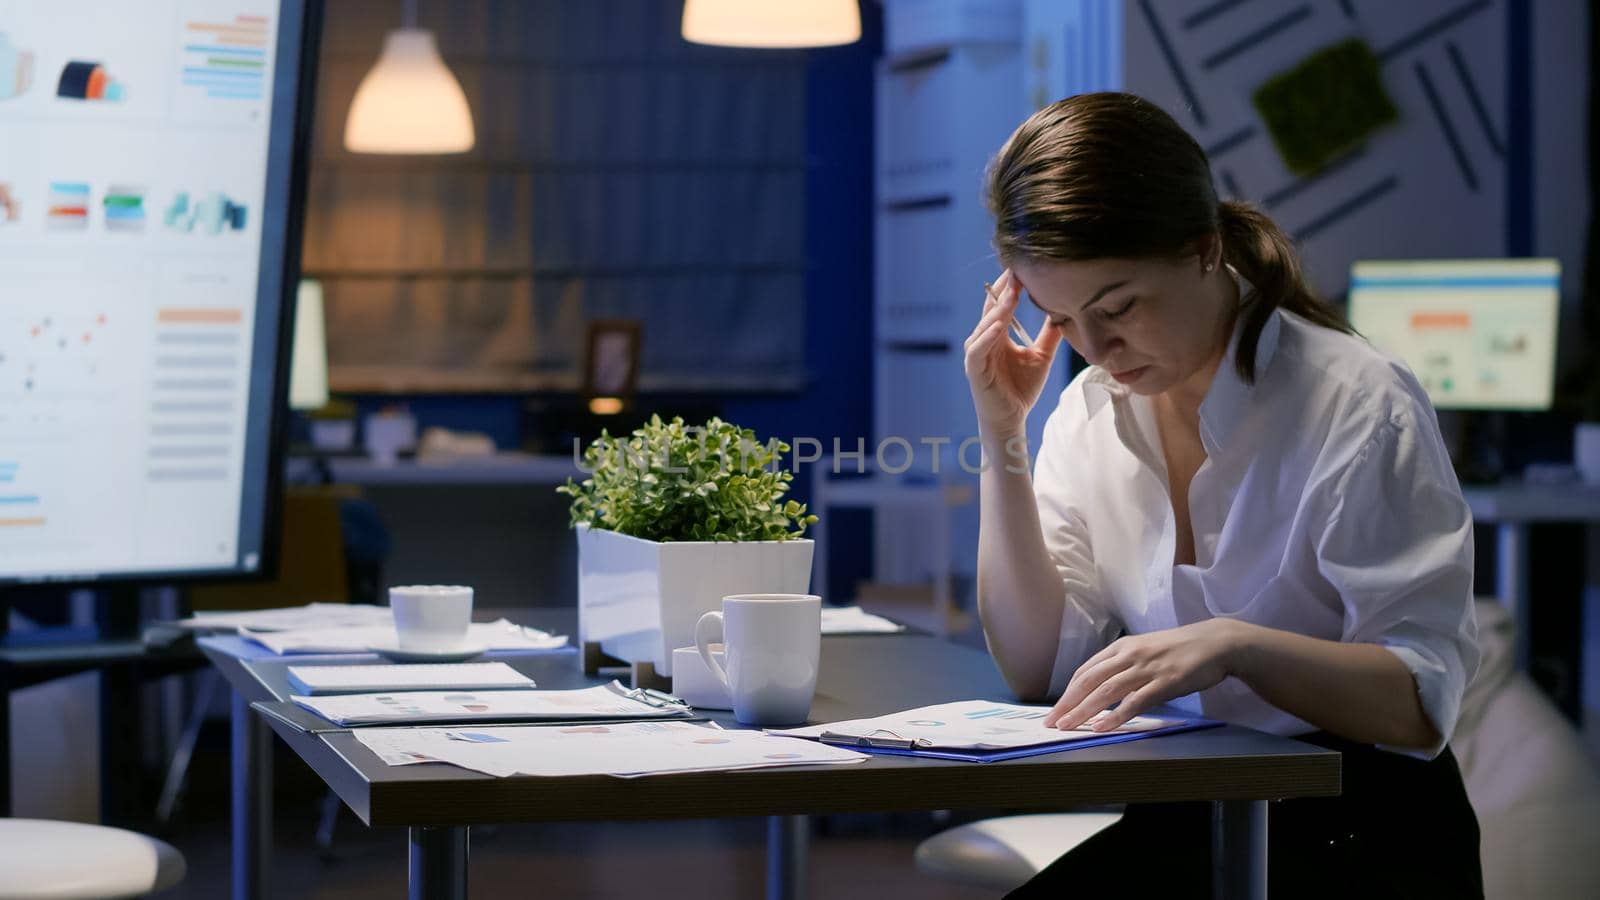 Entrepreneur woman hardworking in office meeting room analyzing company documents looking at management presentation on monitor late at night. Manager analyzing marketing profit in evening, corporate deadline